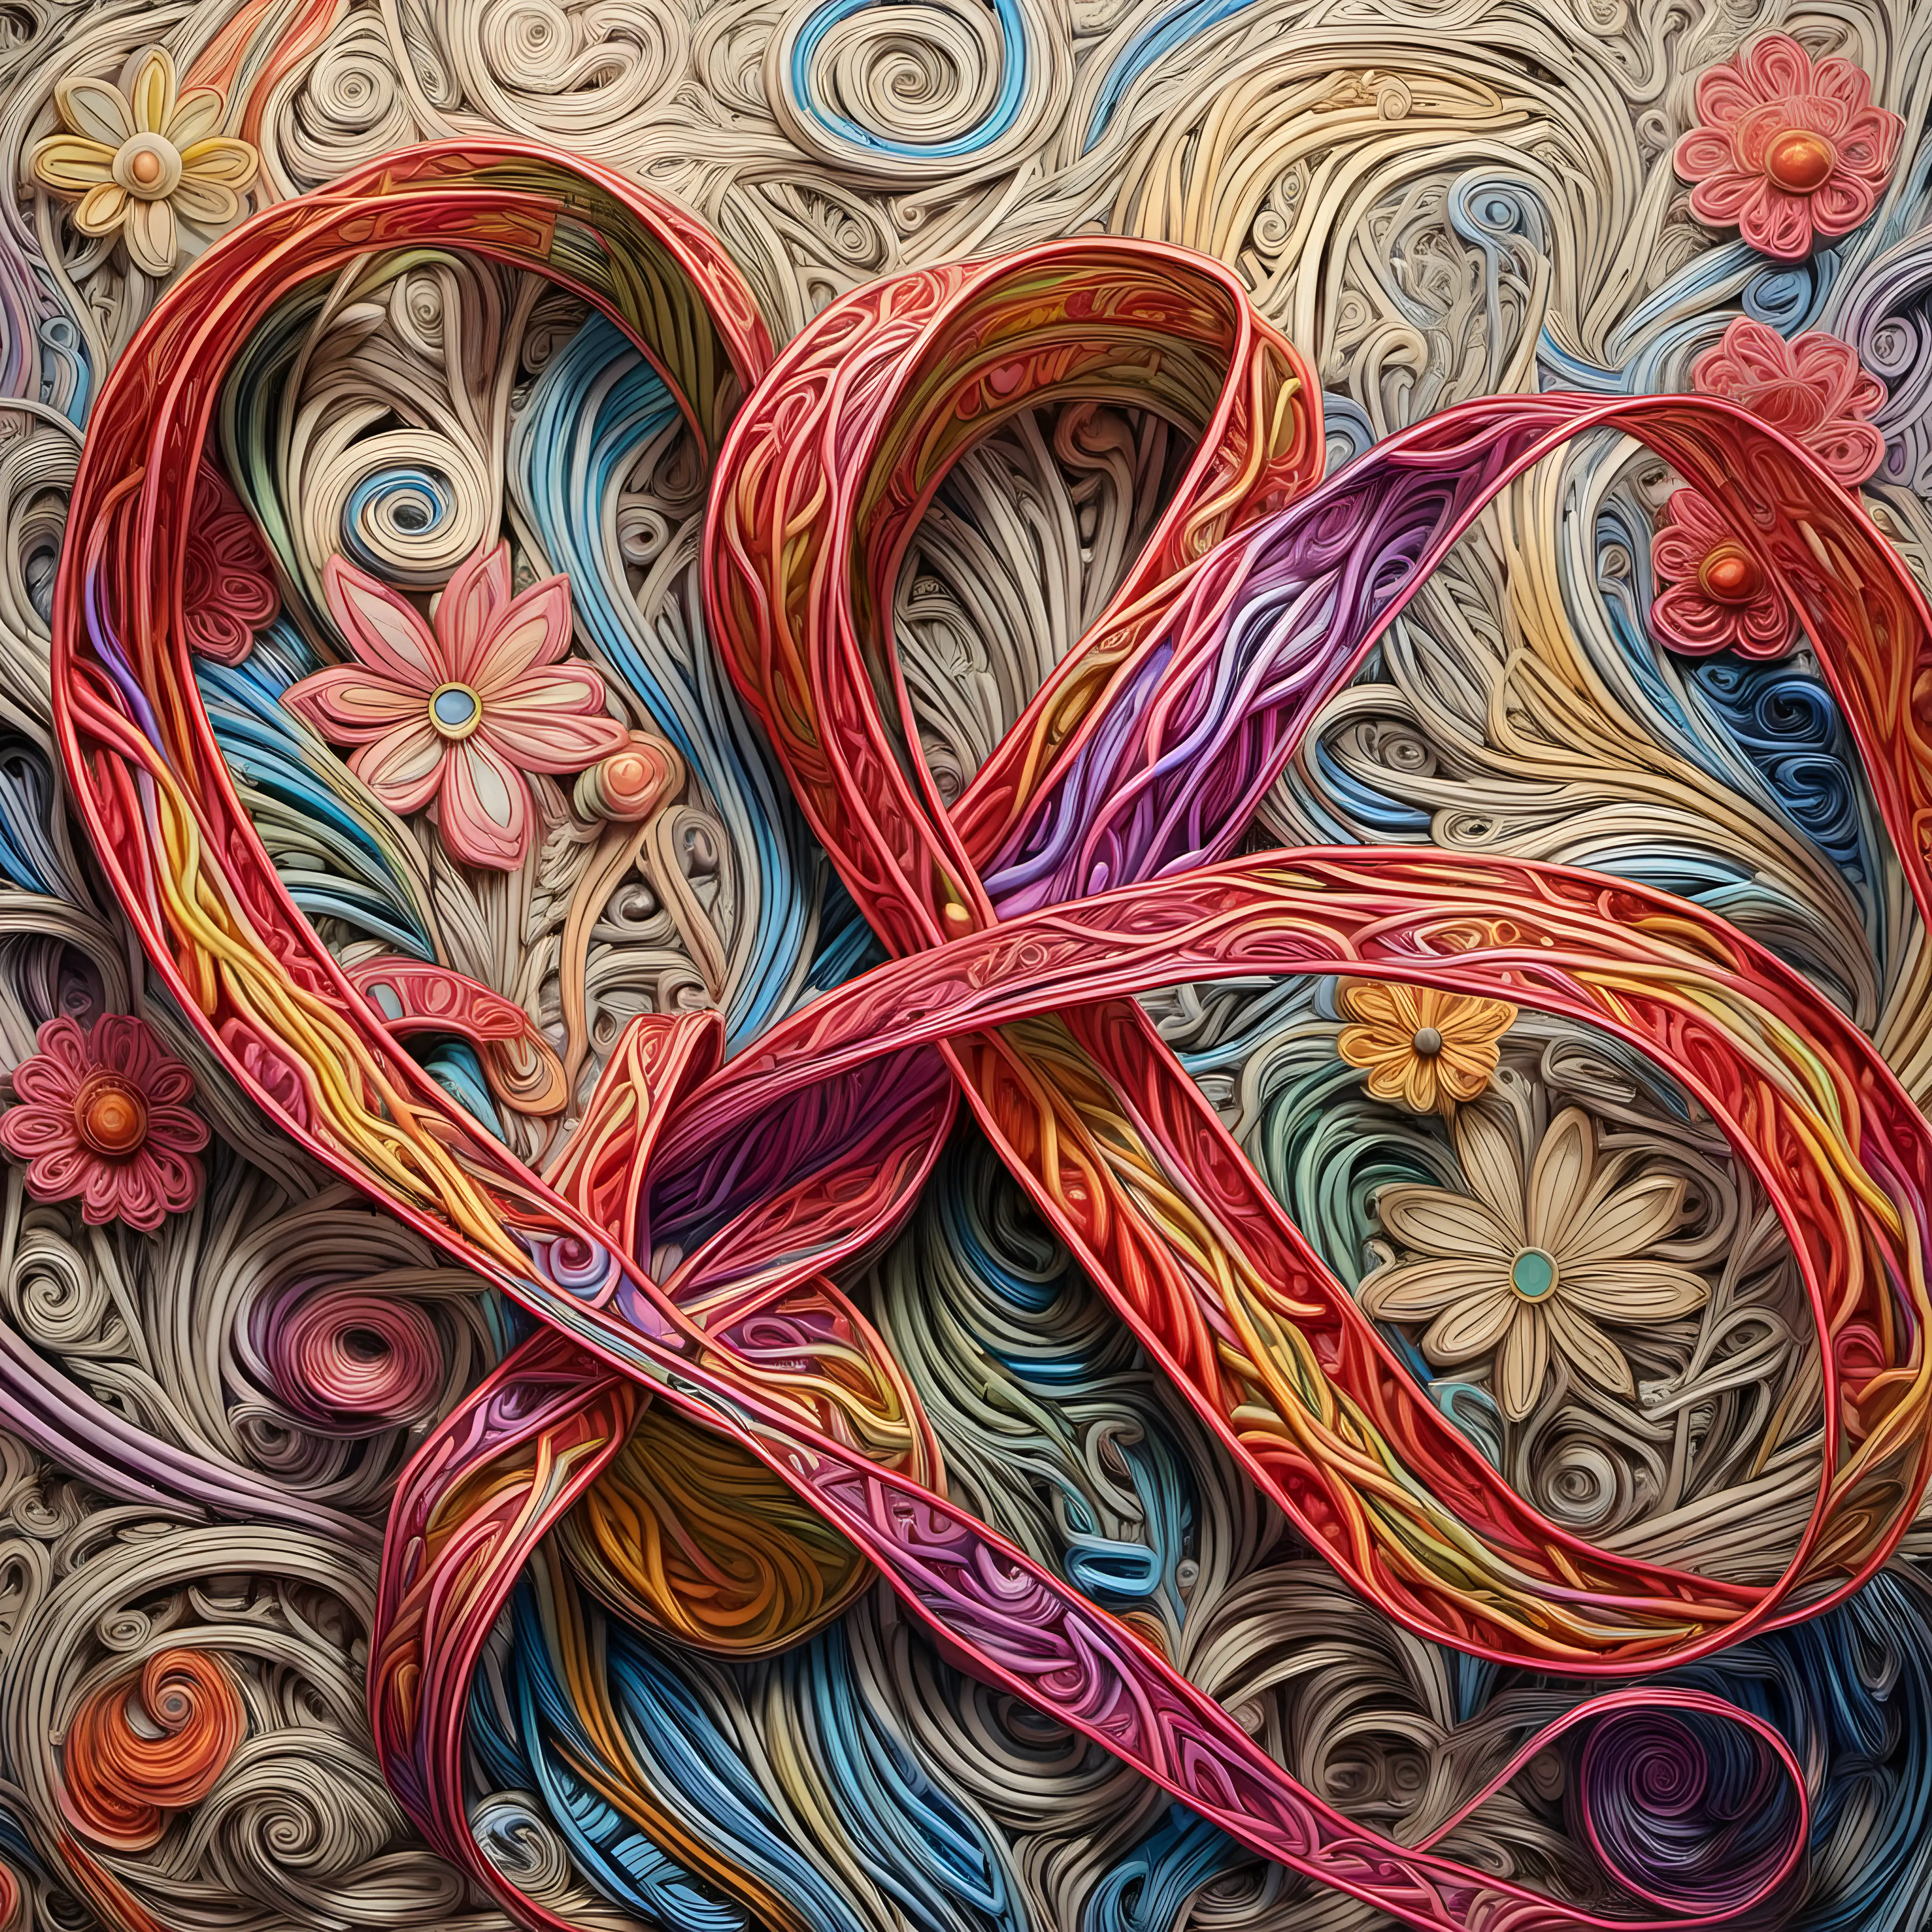 Elegant Love Intricate Floral Ribbon Art with Abstract Details